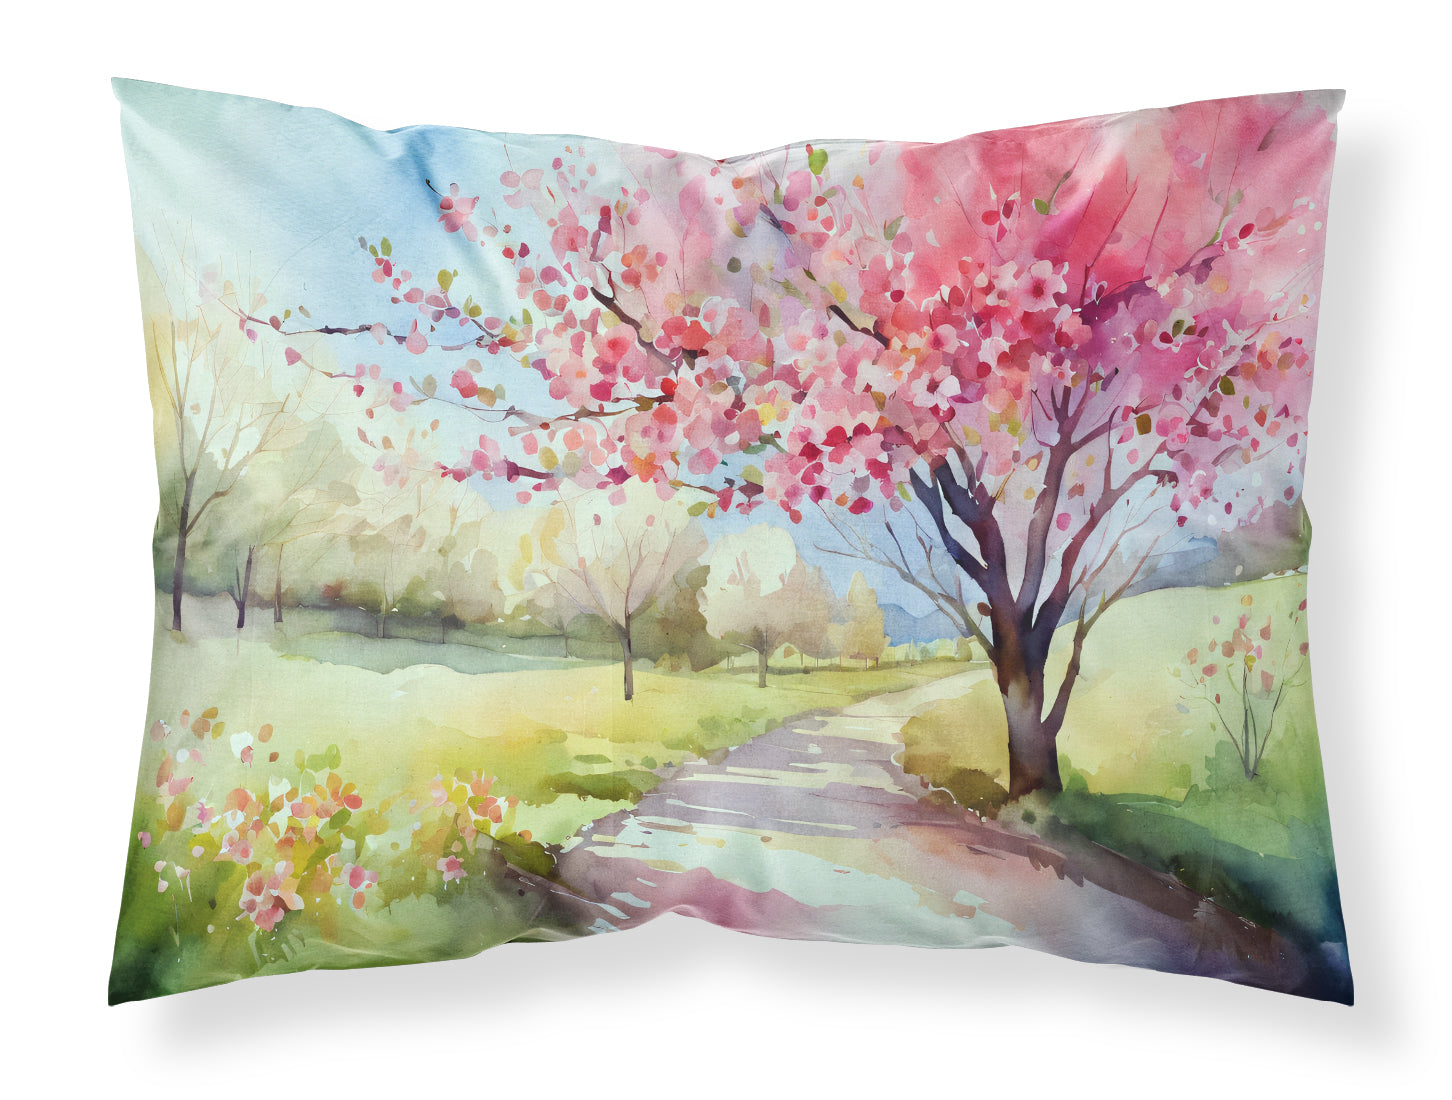 Buy this Michigan Apple Blossoms in Watercolor Fabric Standard Pillowcase